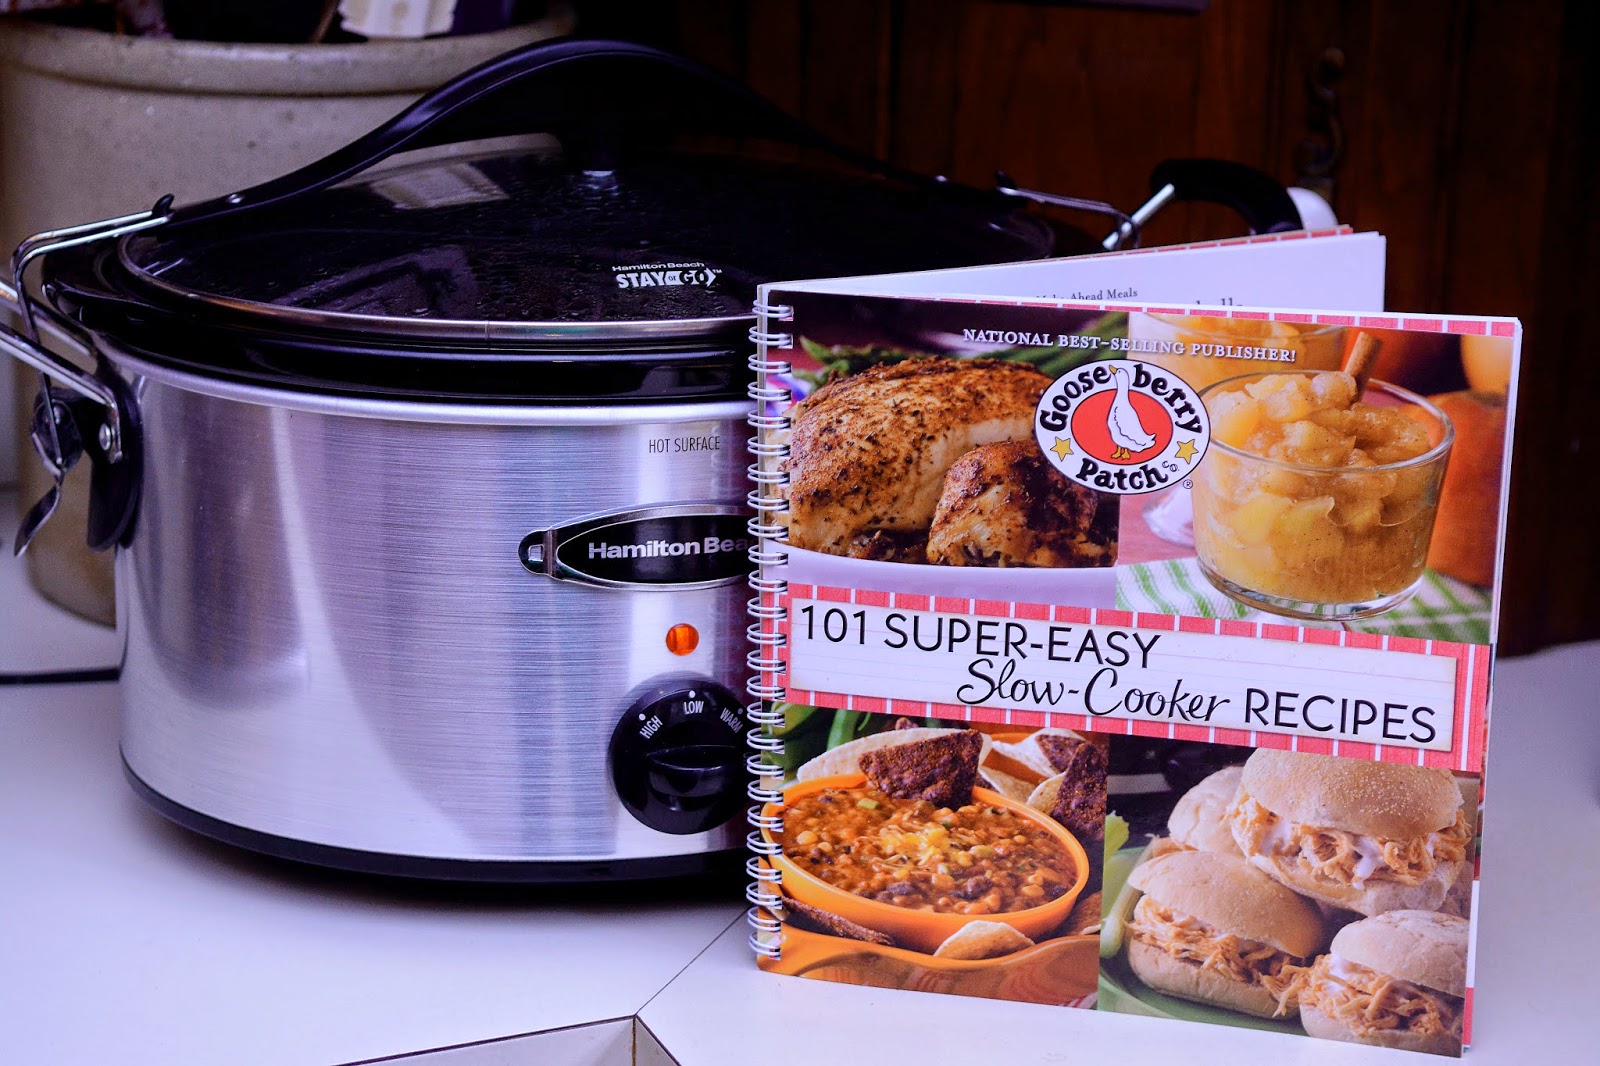 Go-To Recipes for a 13x9 Pan - (Keep It Simple) by Gooseberry Patch  (Paperback)